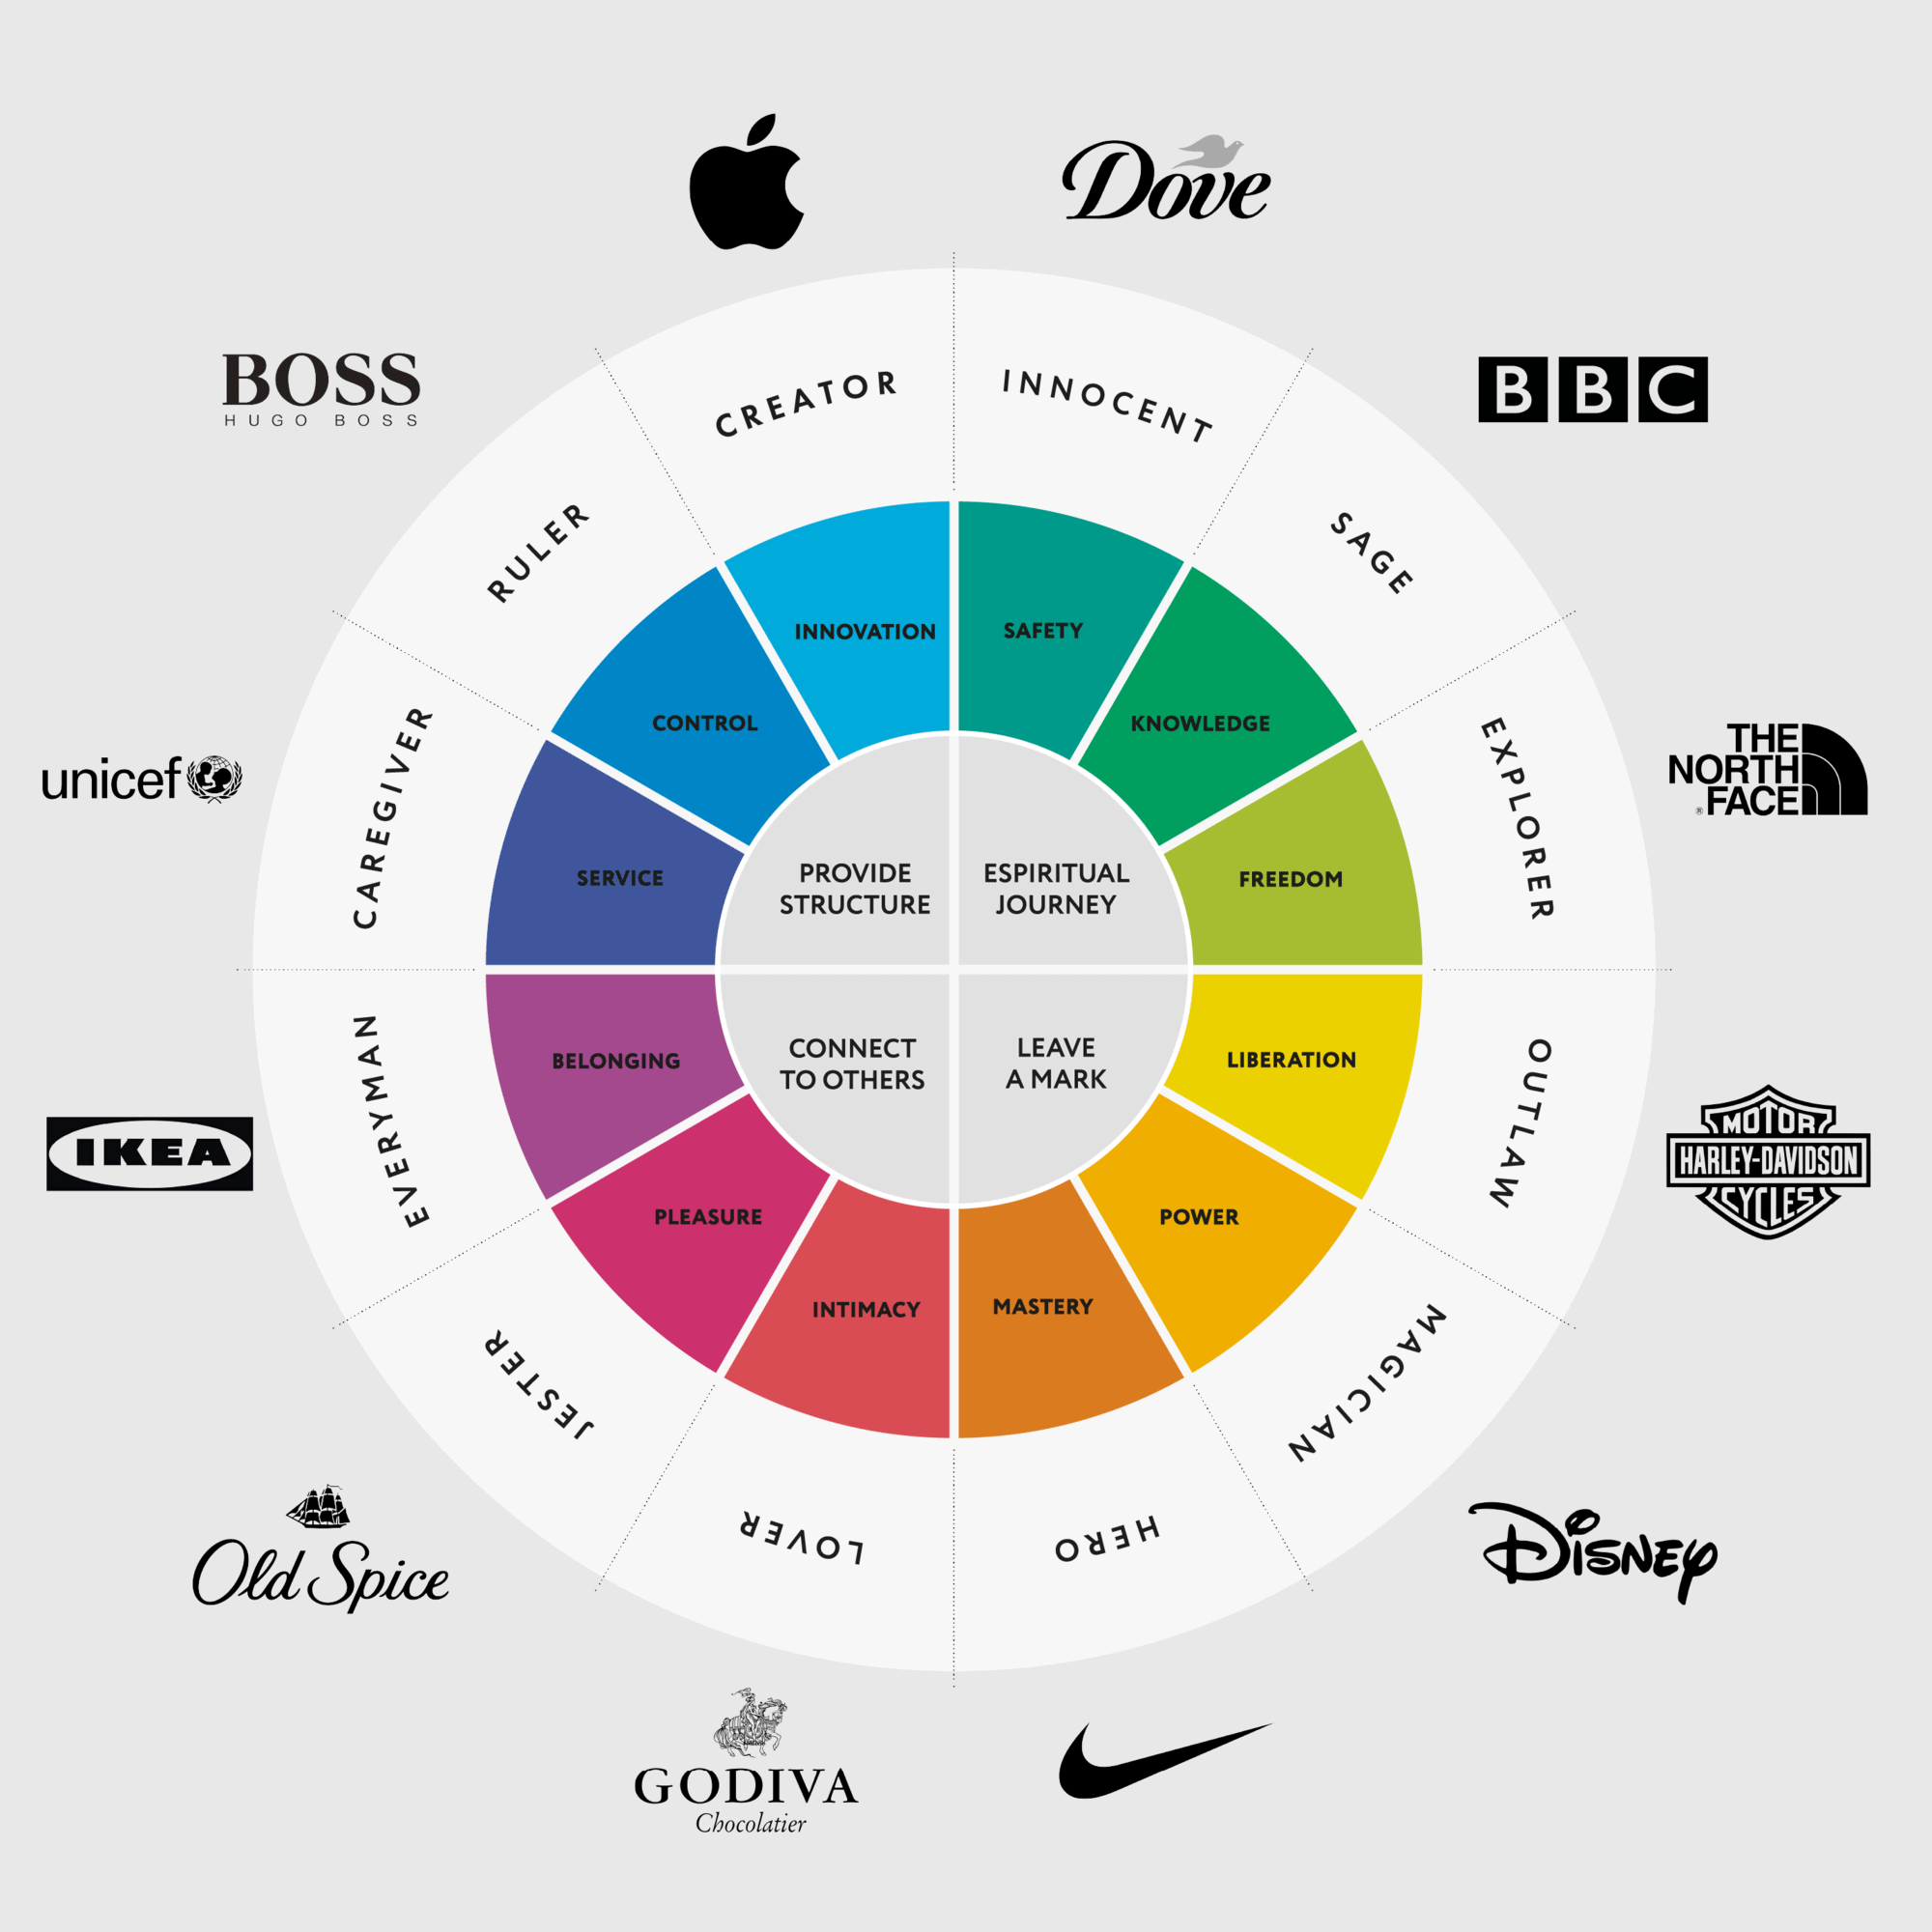 brand archetypes wheel logos from famous brand in the world